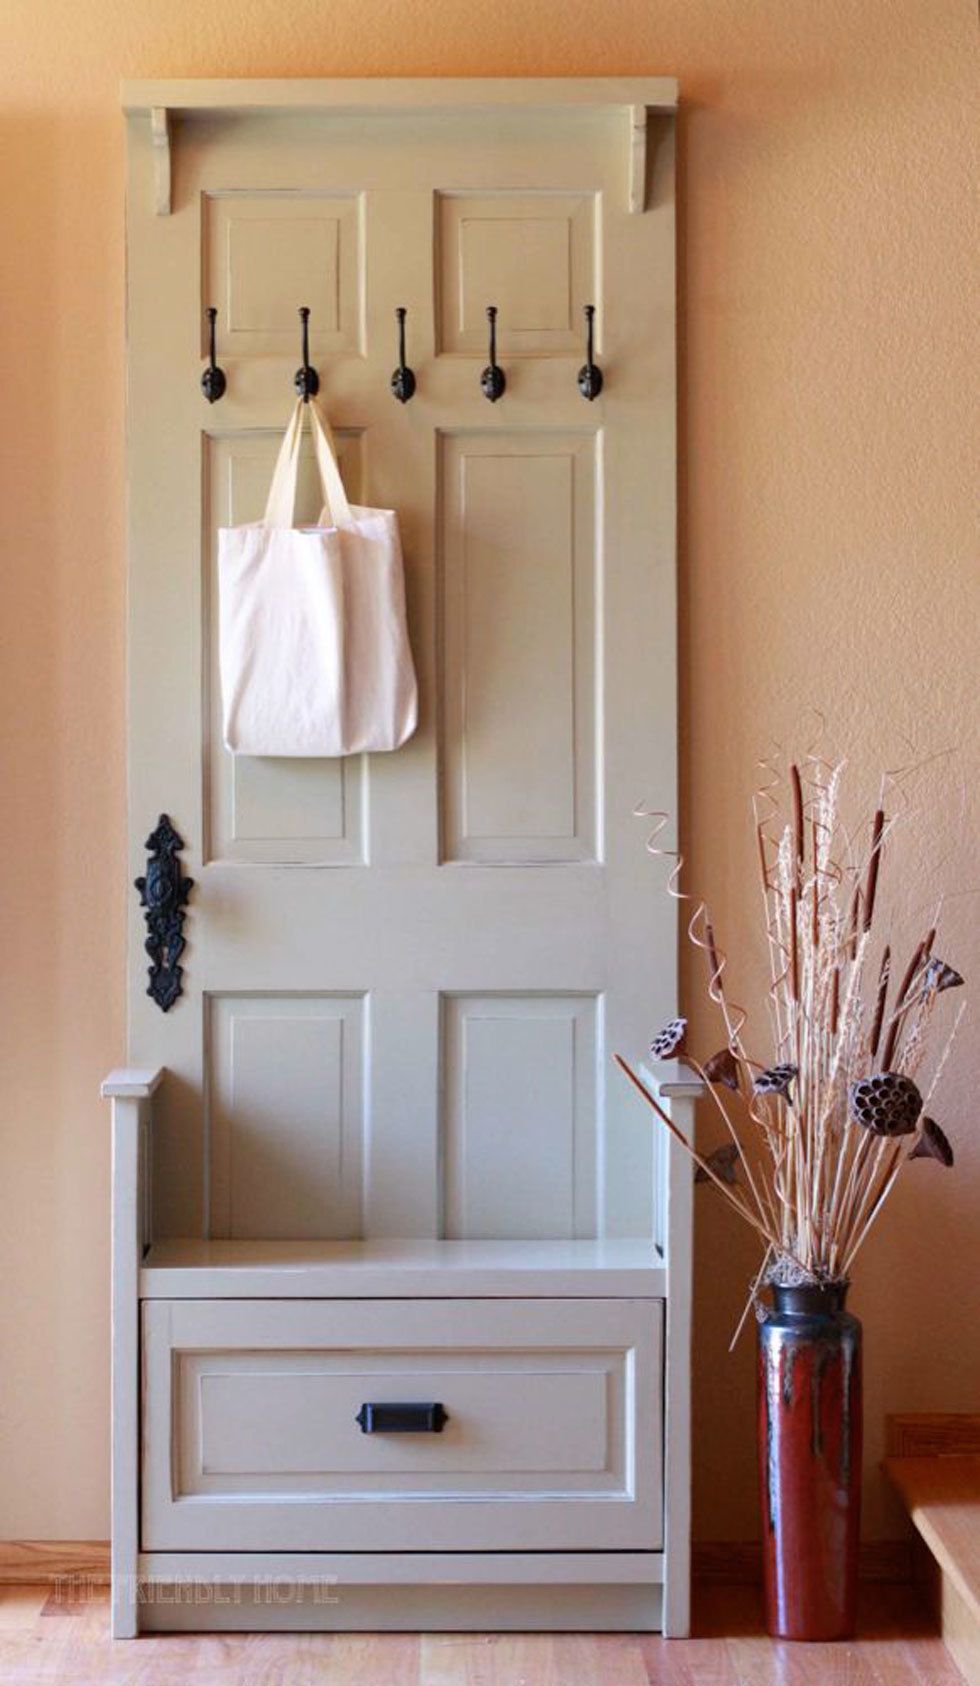 10 Ways to Reuse Old Doors in Your Home| Reuse Old Doors, Reuse Old Doors Ideas, Home Decor, Home Decor Ideas, Home Decor DIY, Home Decor Ideas DIY 